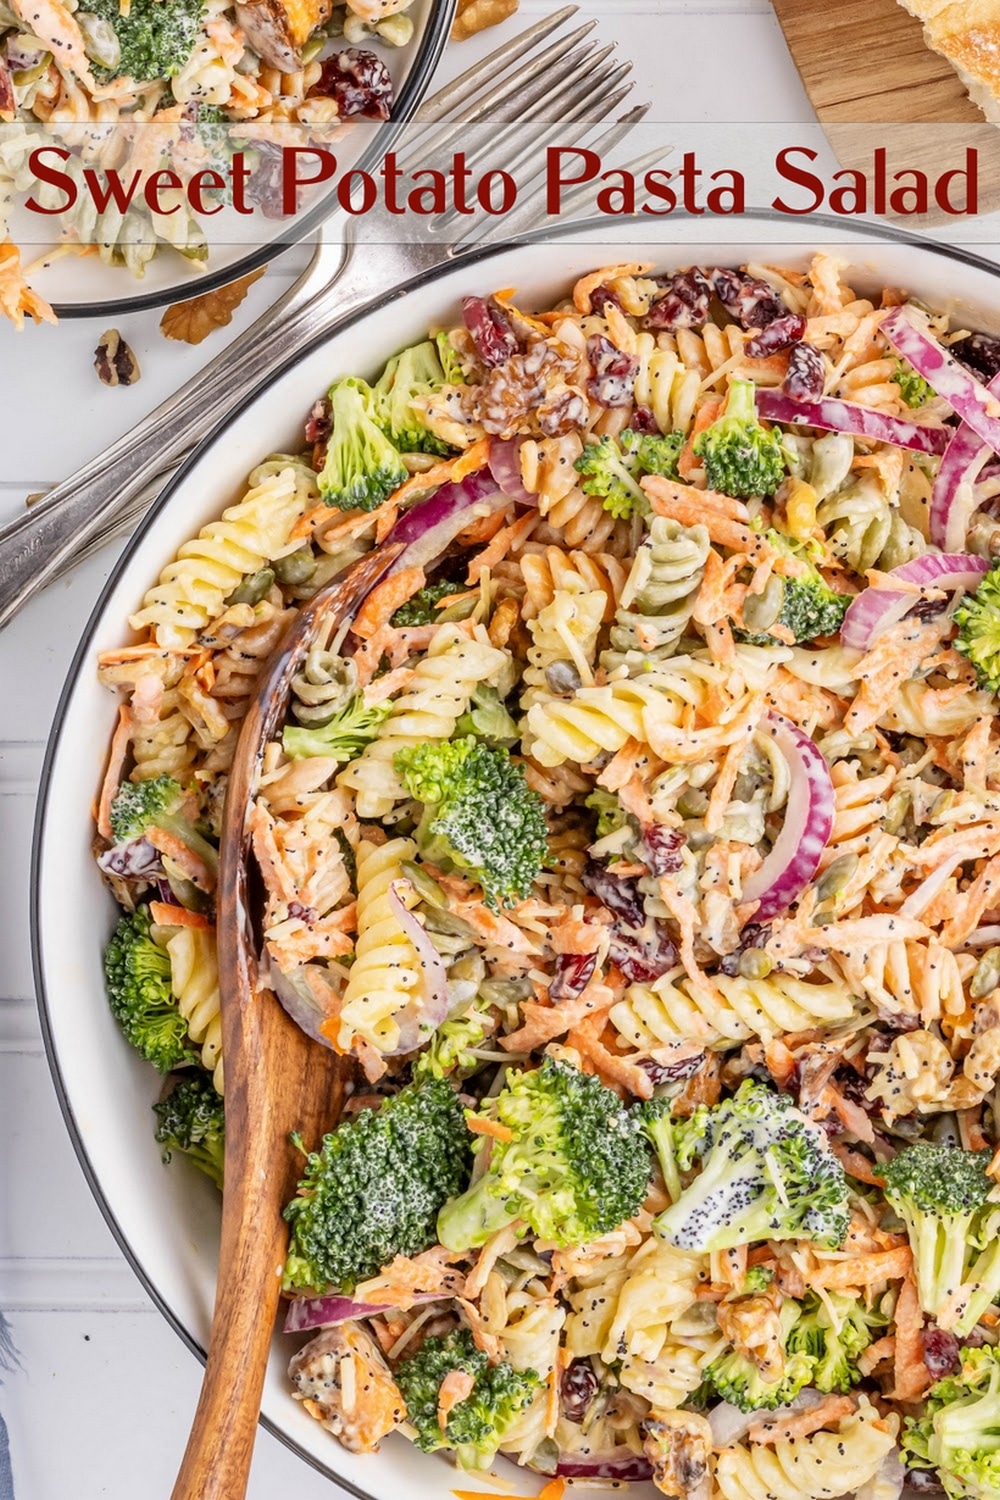 A fall pasta salad made with sweet potato, red onion and fresh broccoli with pasta noodles. A homemade poppy seed dressing ties all the flavors together. Perfect for tailgating, Halloween parties and as a cold Thanksgiving salad or side dish. via @cmpollak1